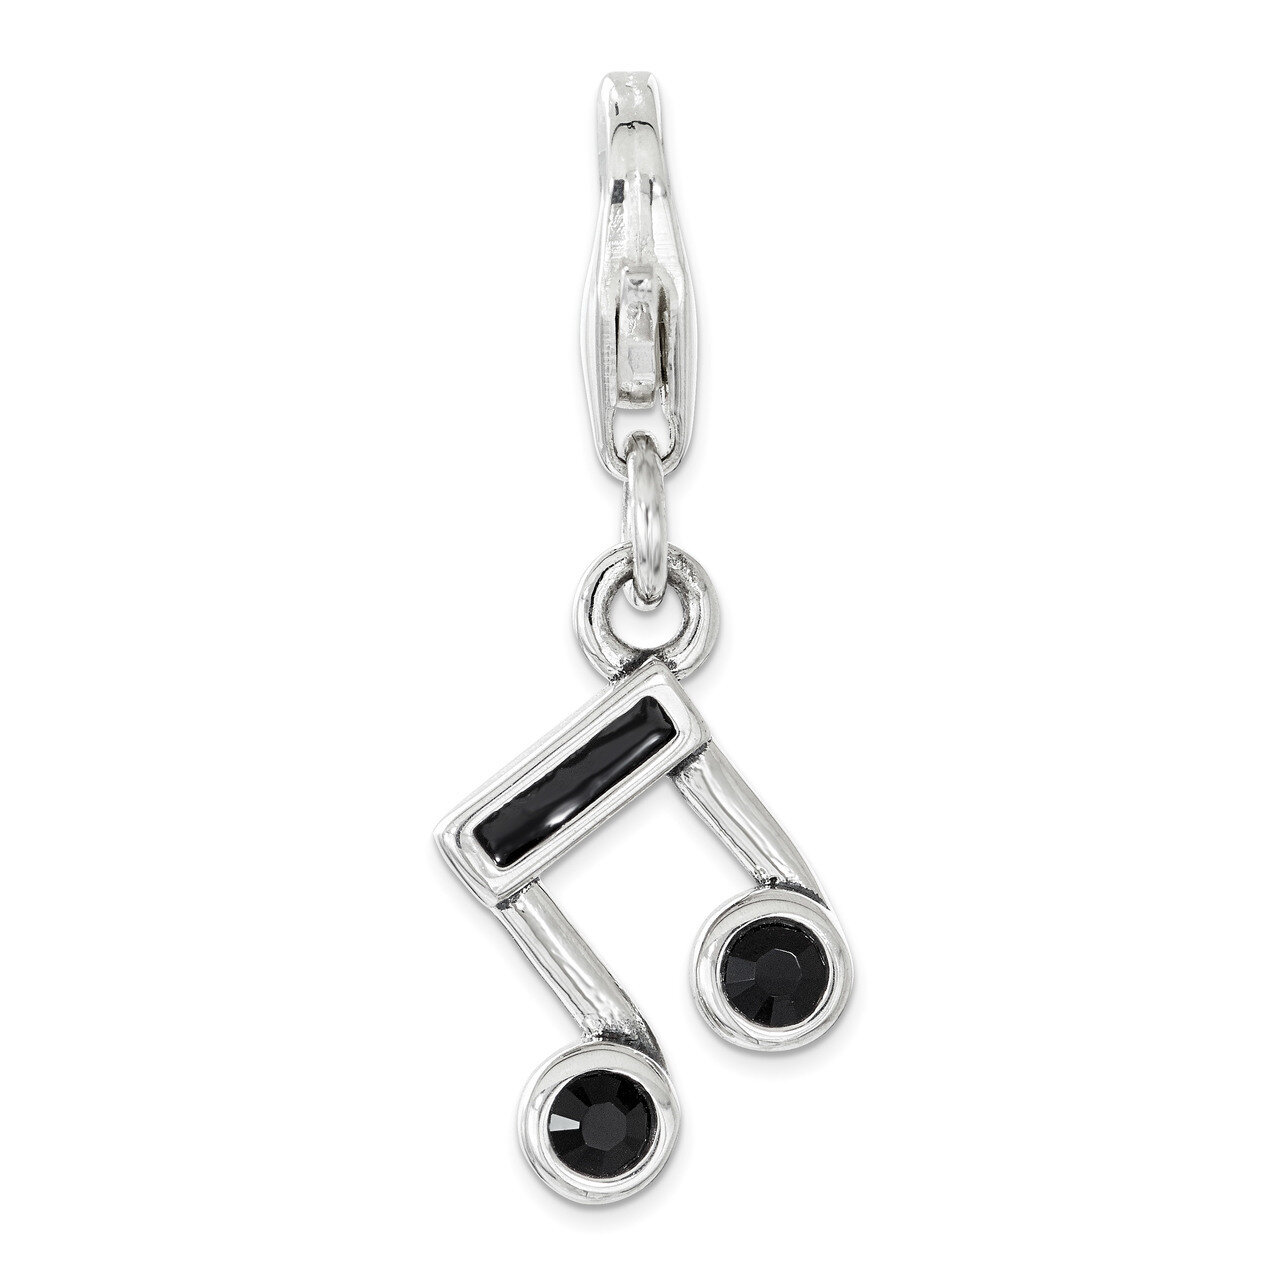 Music Note Charm - Sterling Silver Enameled QCC1144